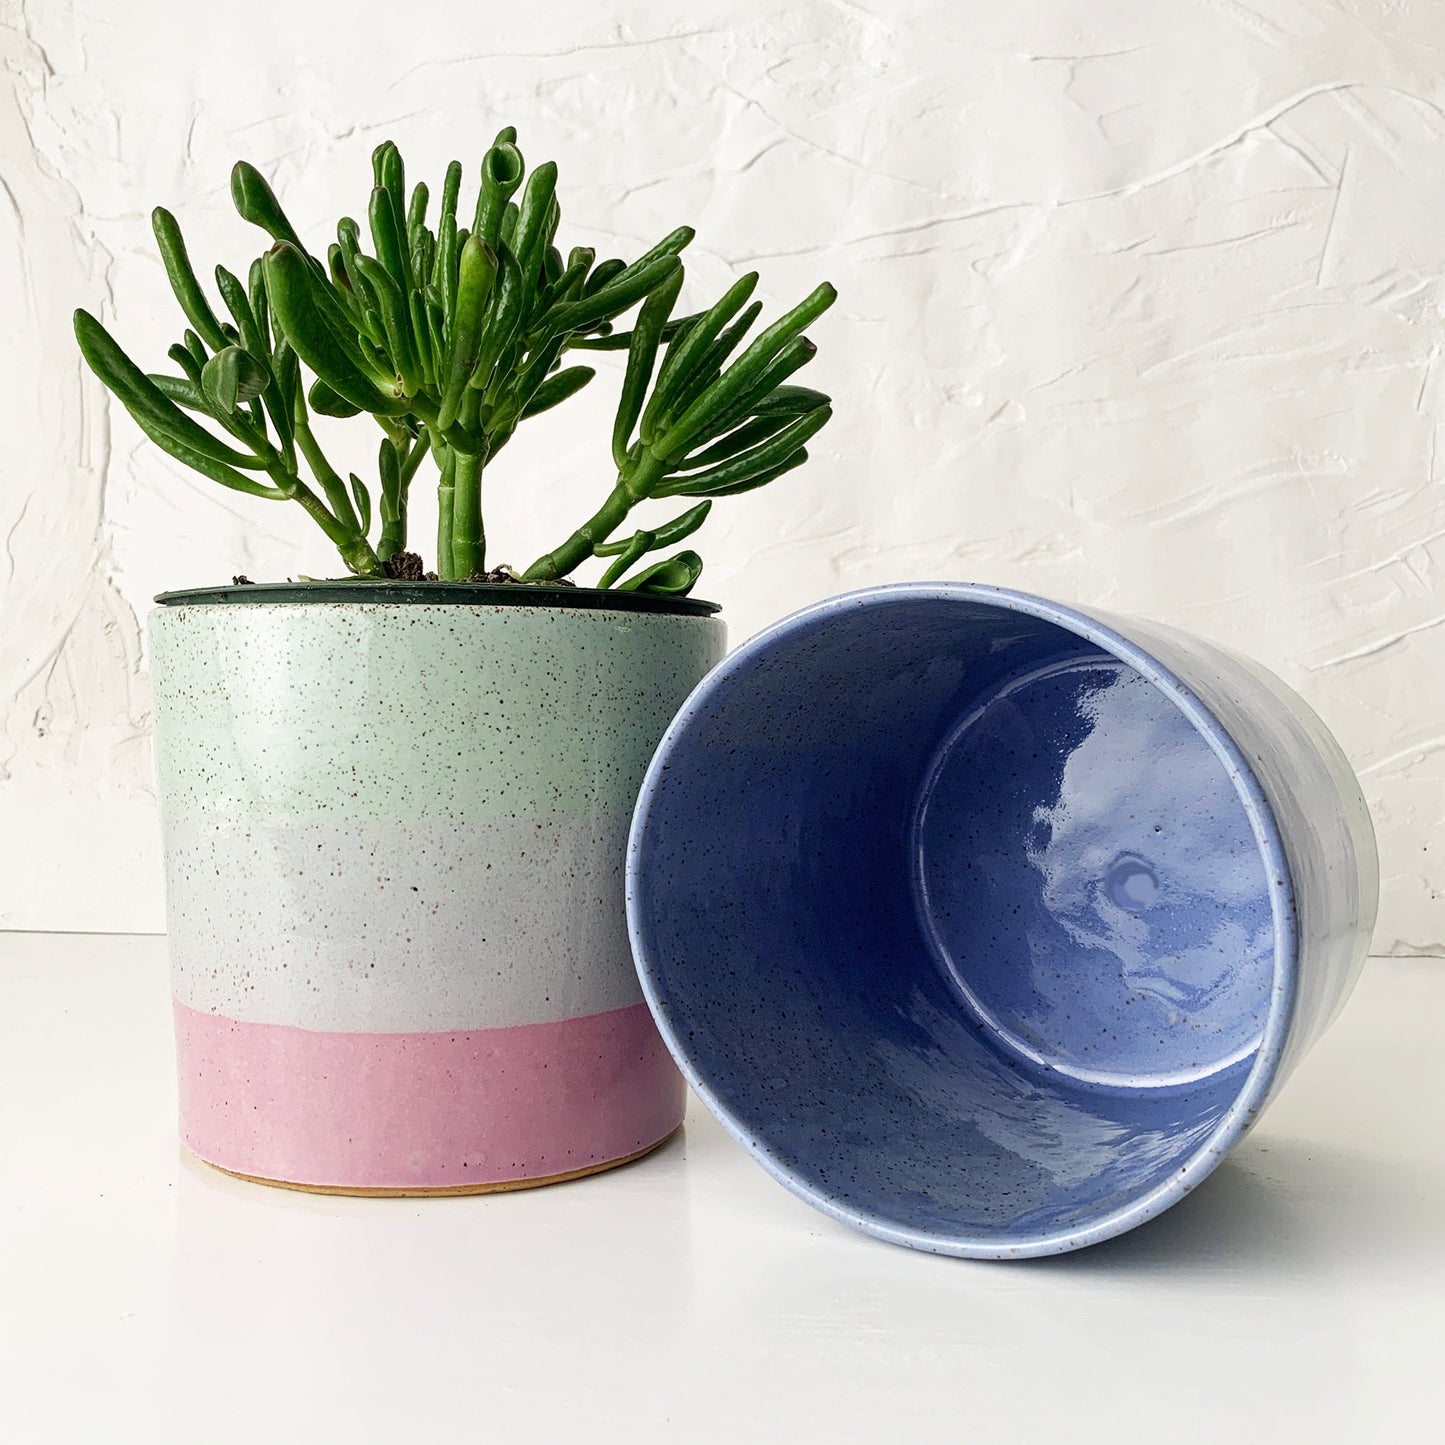 STONEWARE Brighter Days Medium Stoneware Planter - Available in Assorted Colors